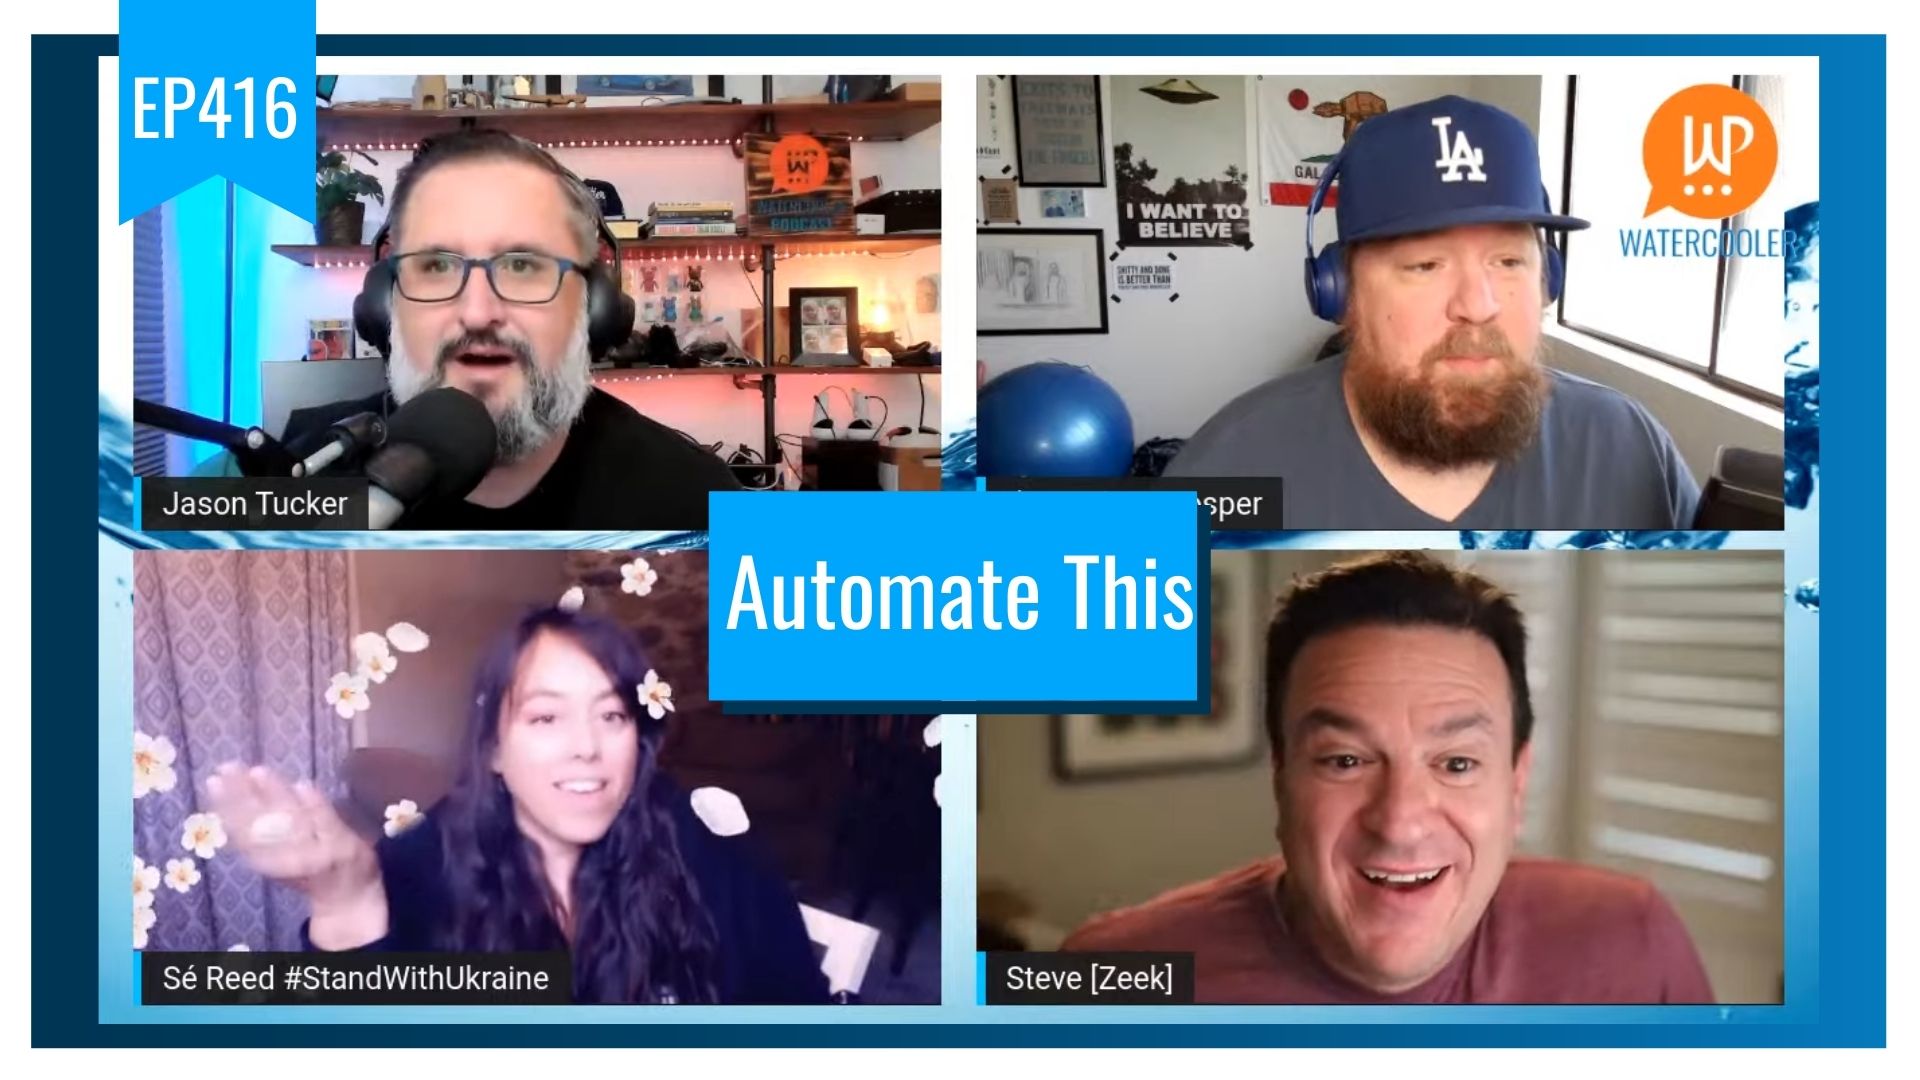 EP416 – Automate This